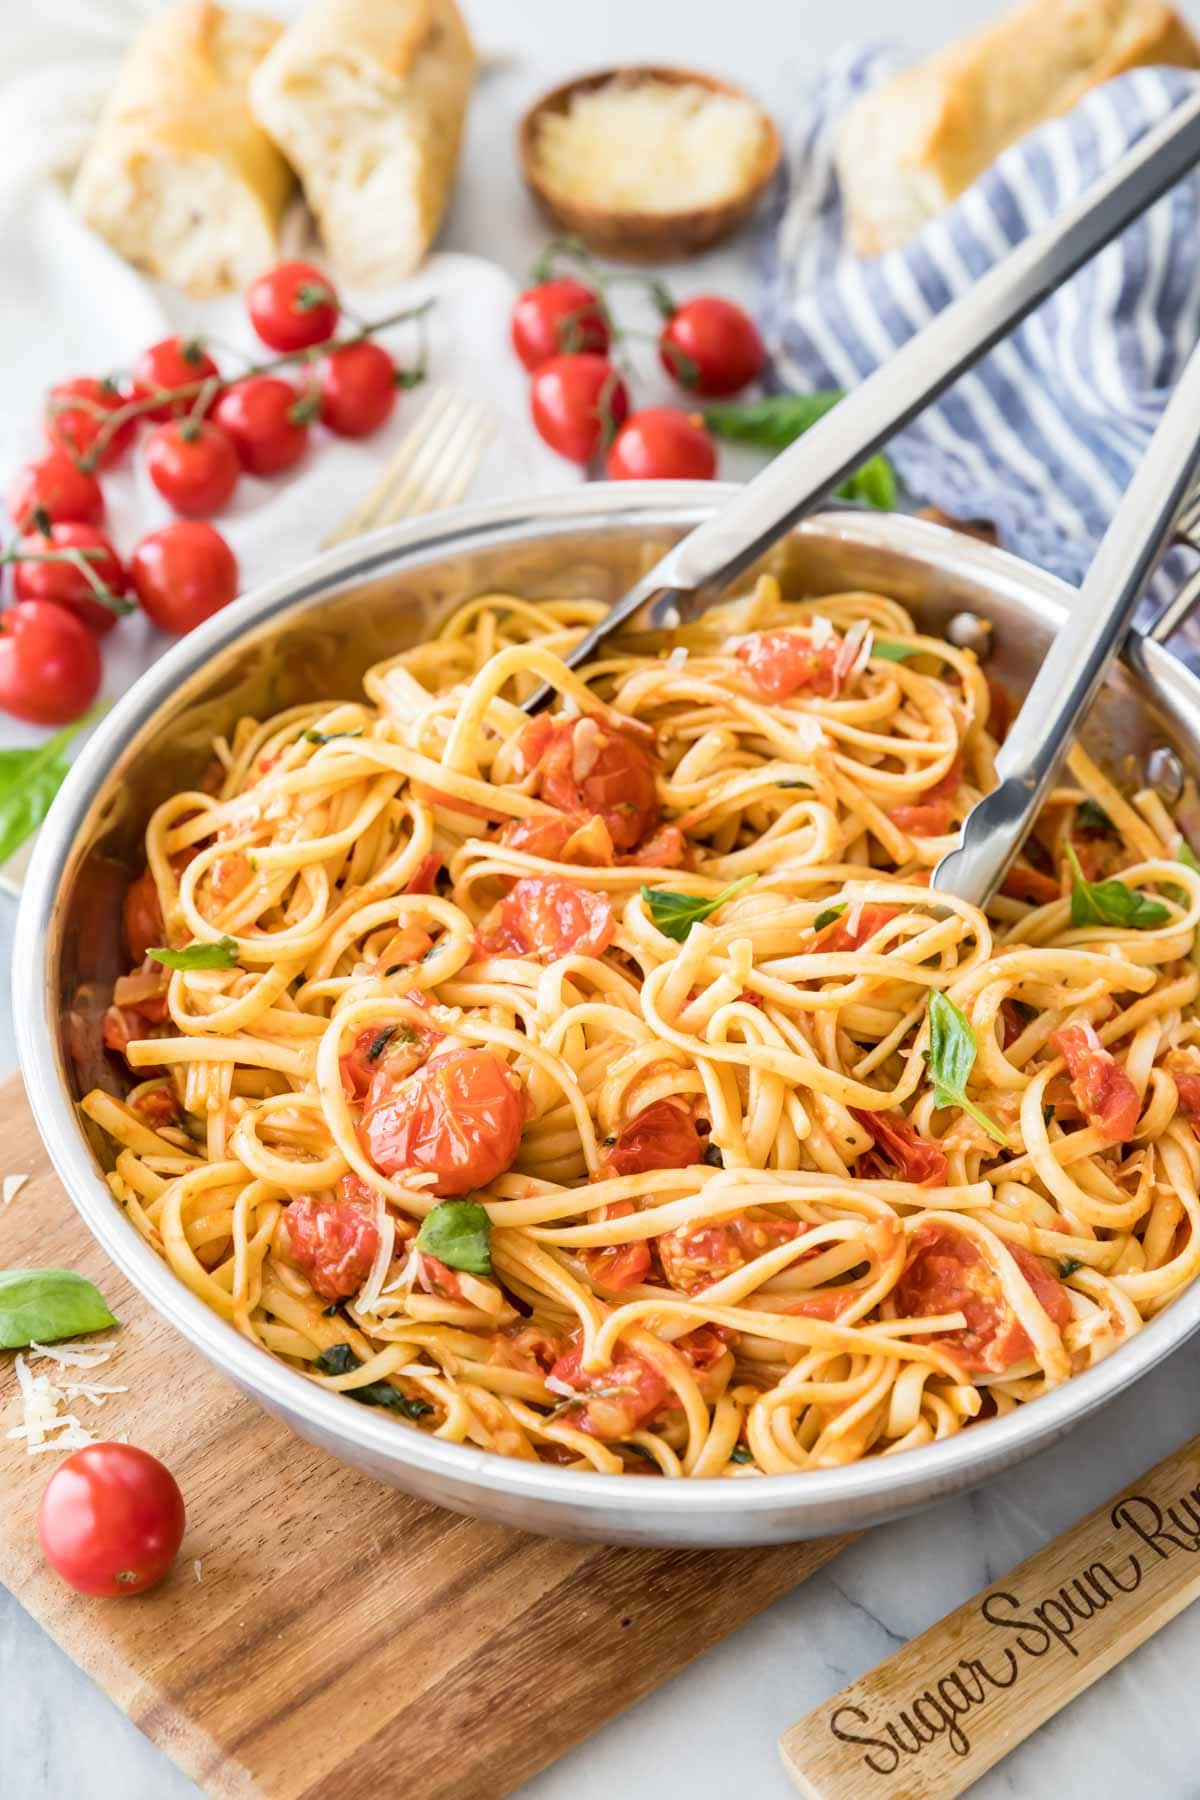 tongs tossing linguine pasta with cherry tomatoes and fresh basil in a stainless steel skillet